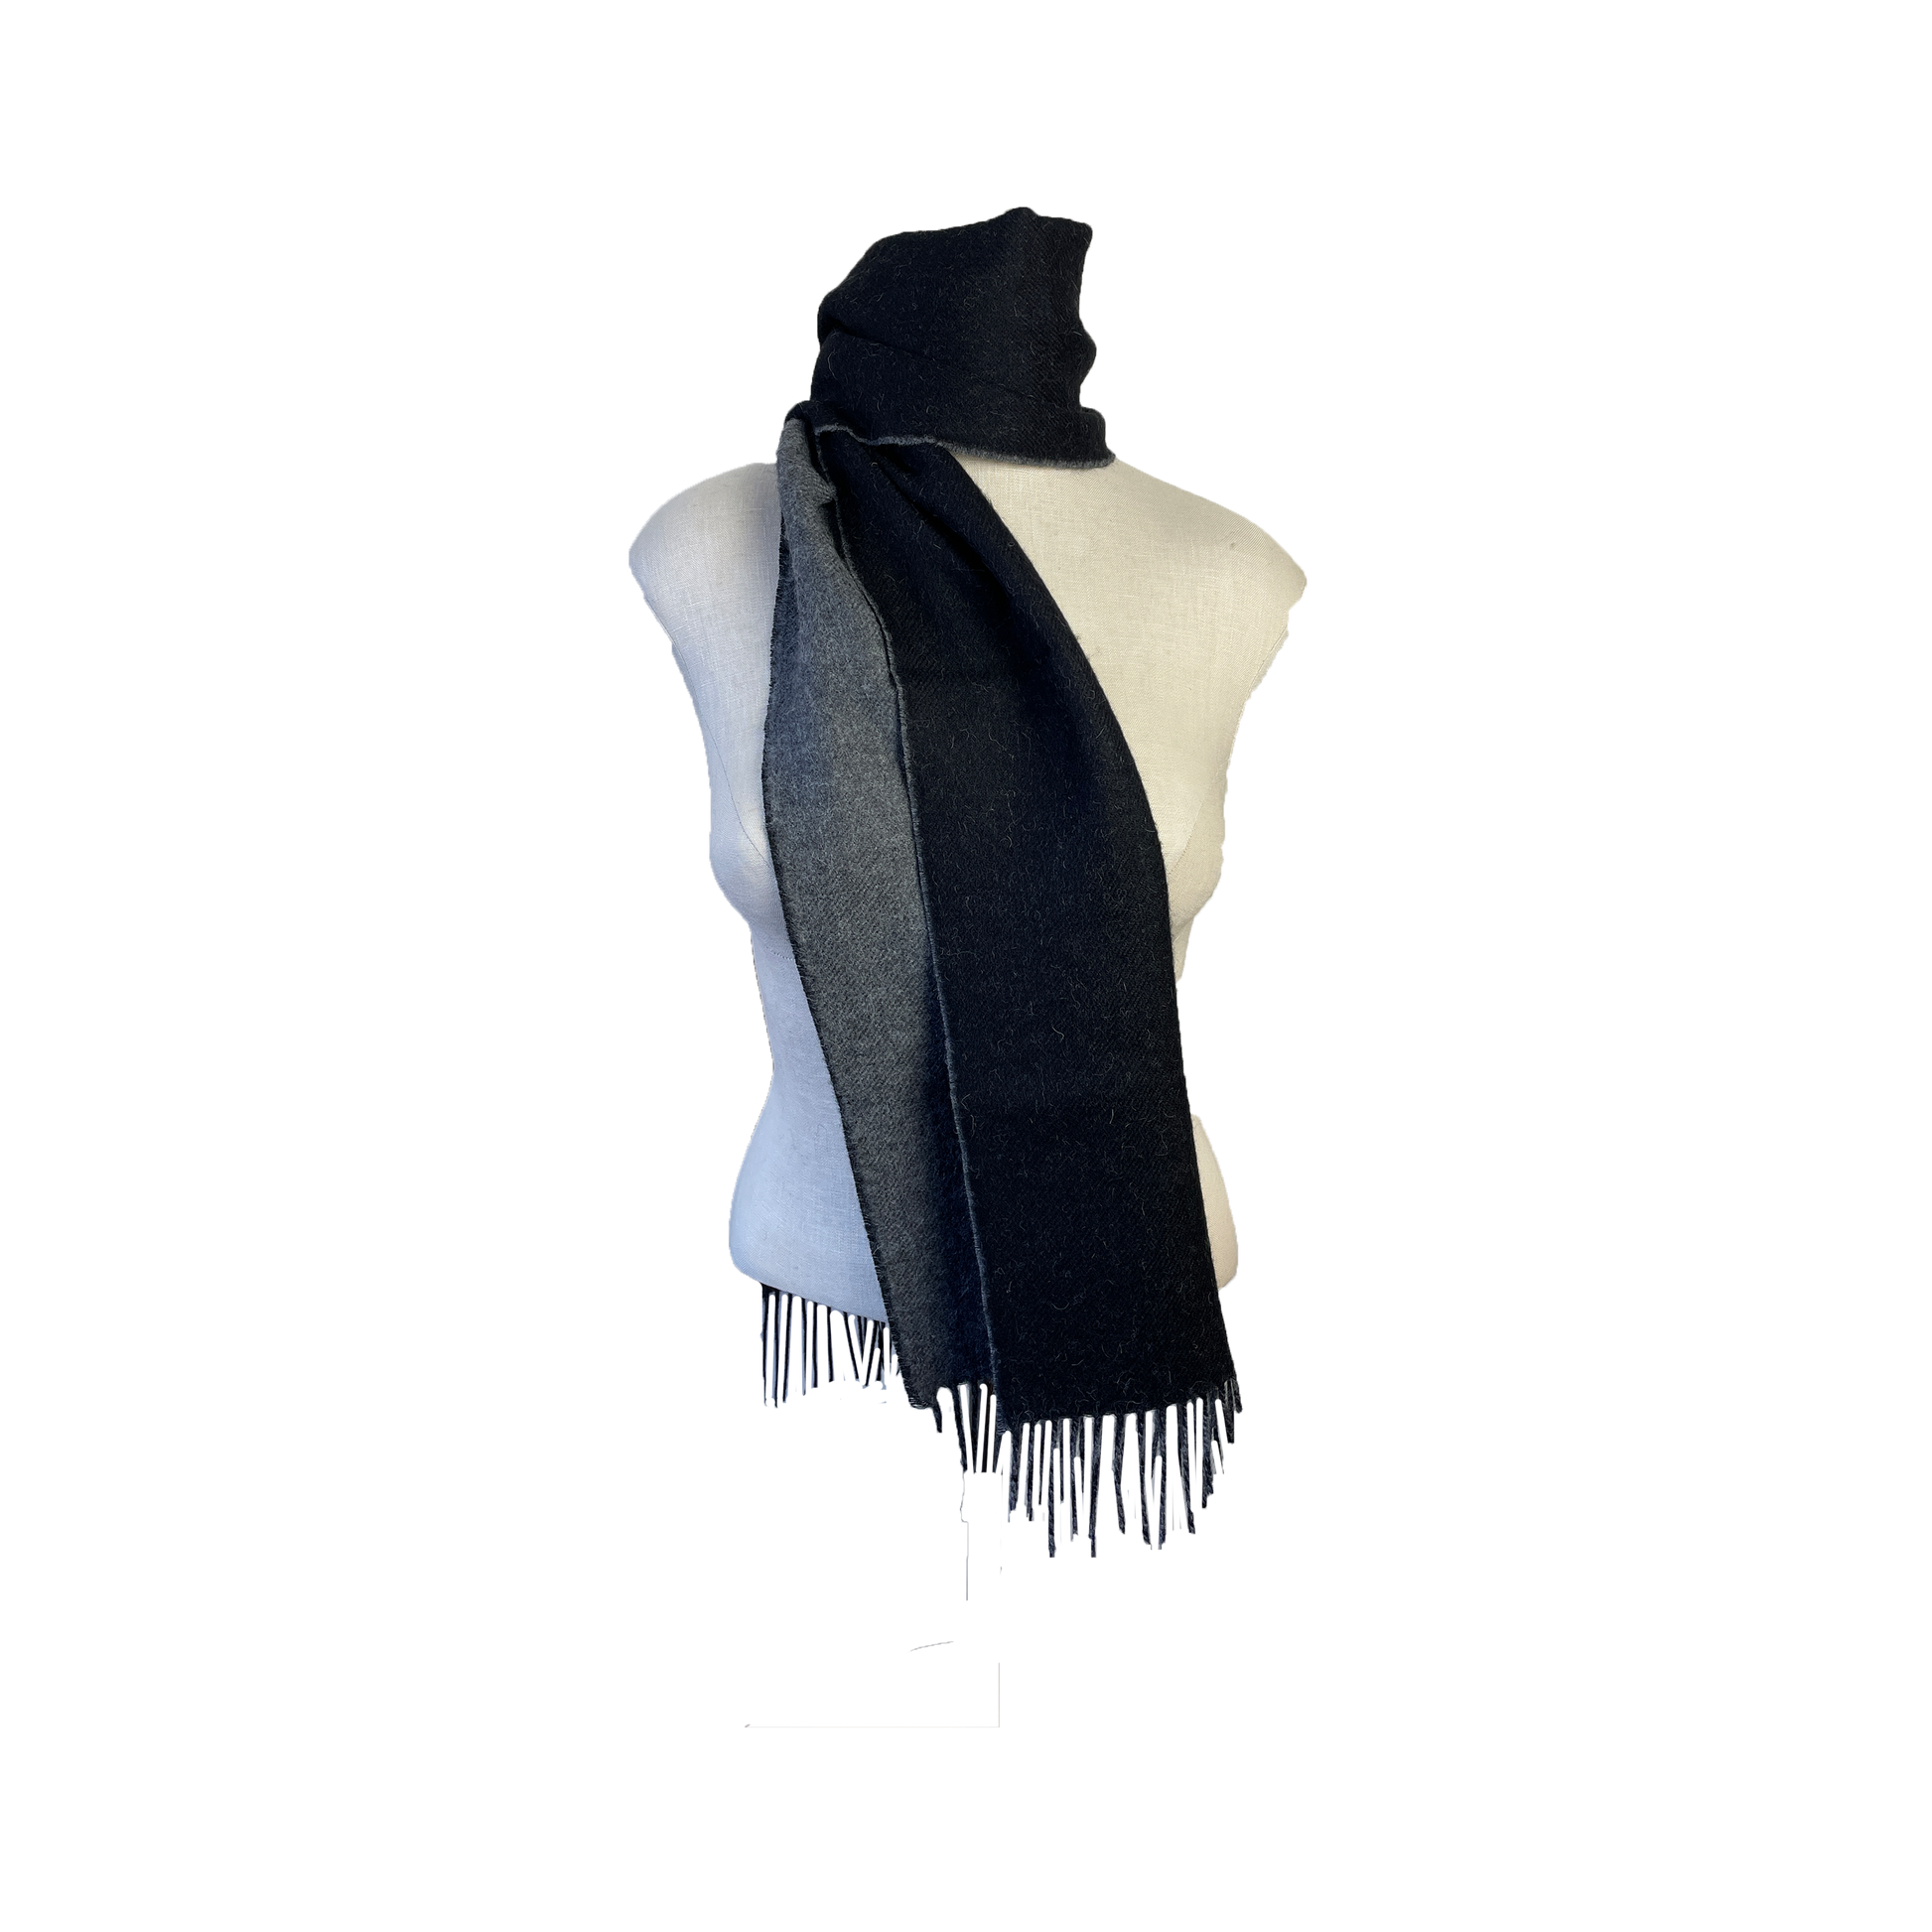 Alpaca Double Face Scarf in Black and Charcoal